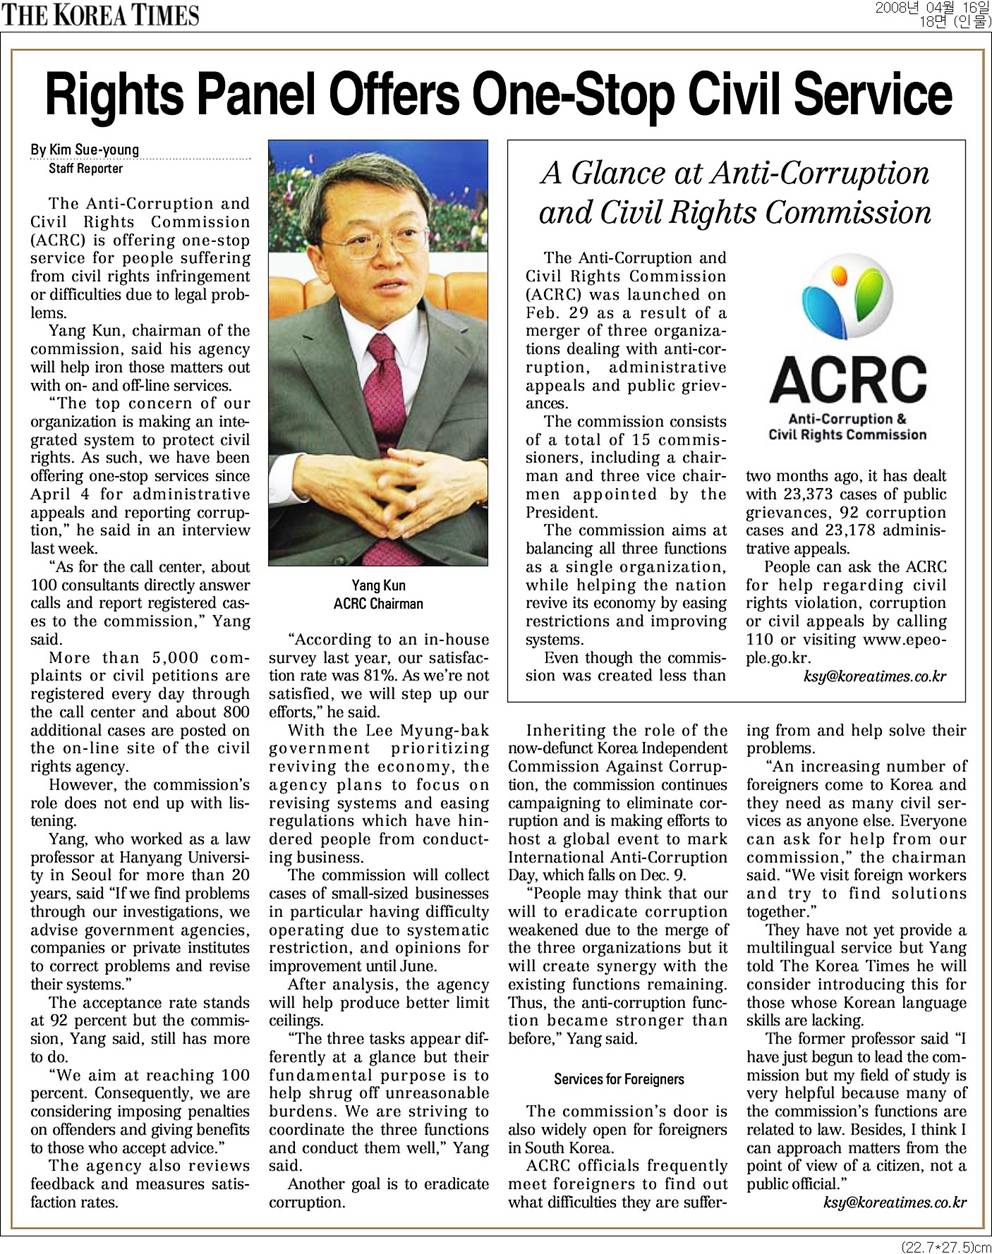 Rights Panel Offers One-Stop Civil Service (Apr. 16, 2008, Korea Times)  list image